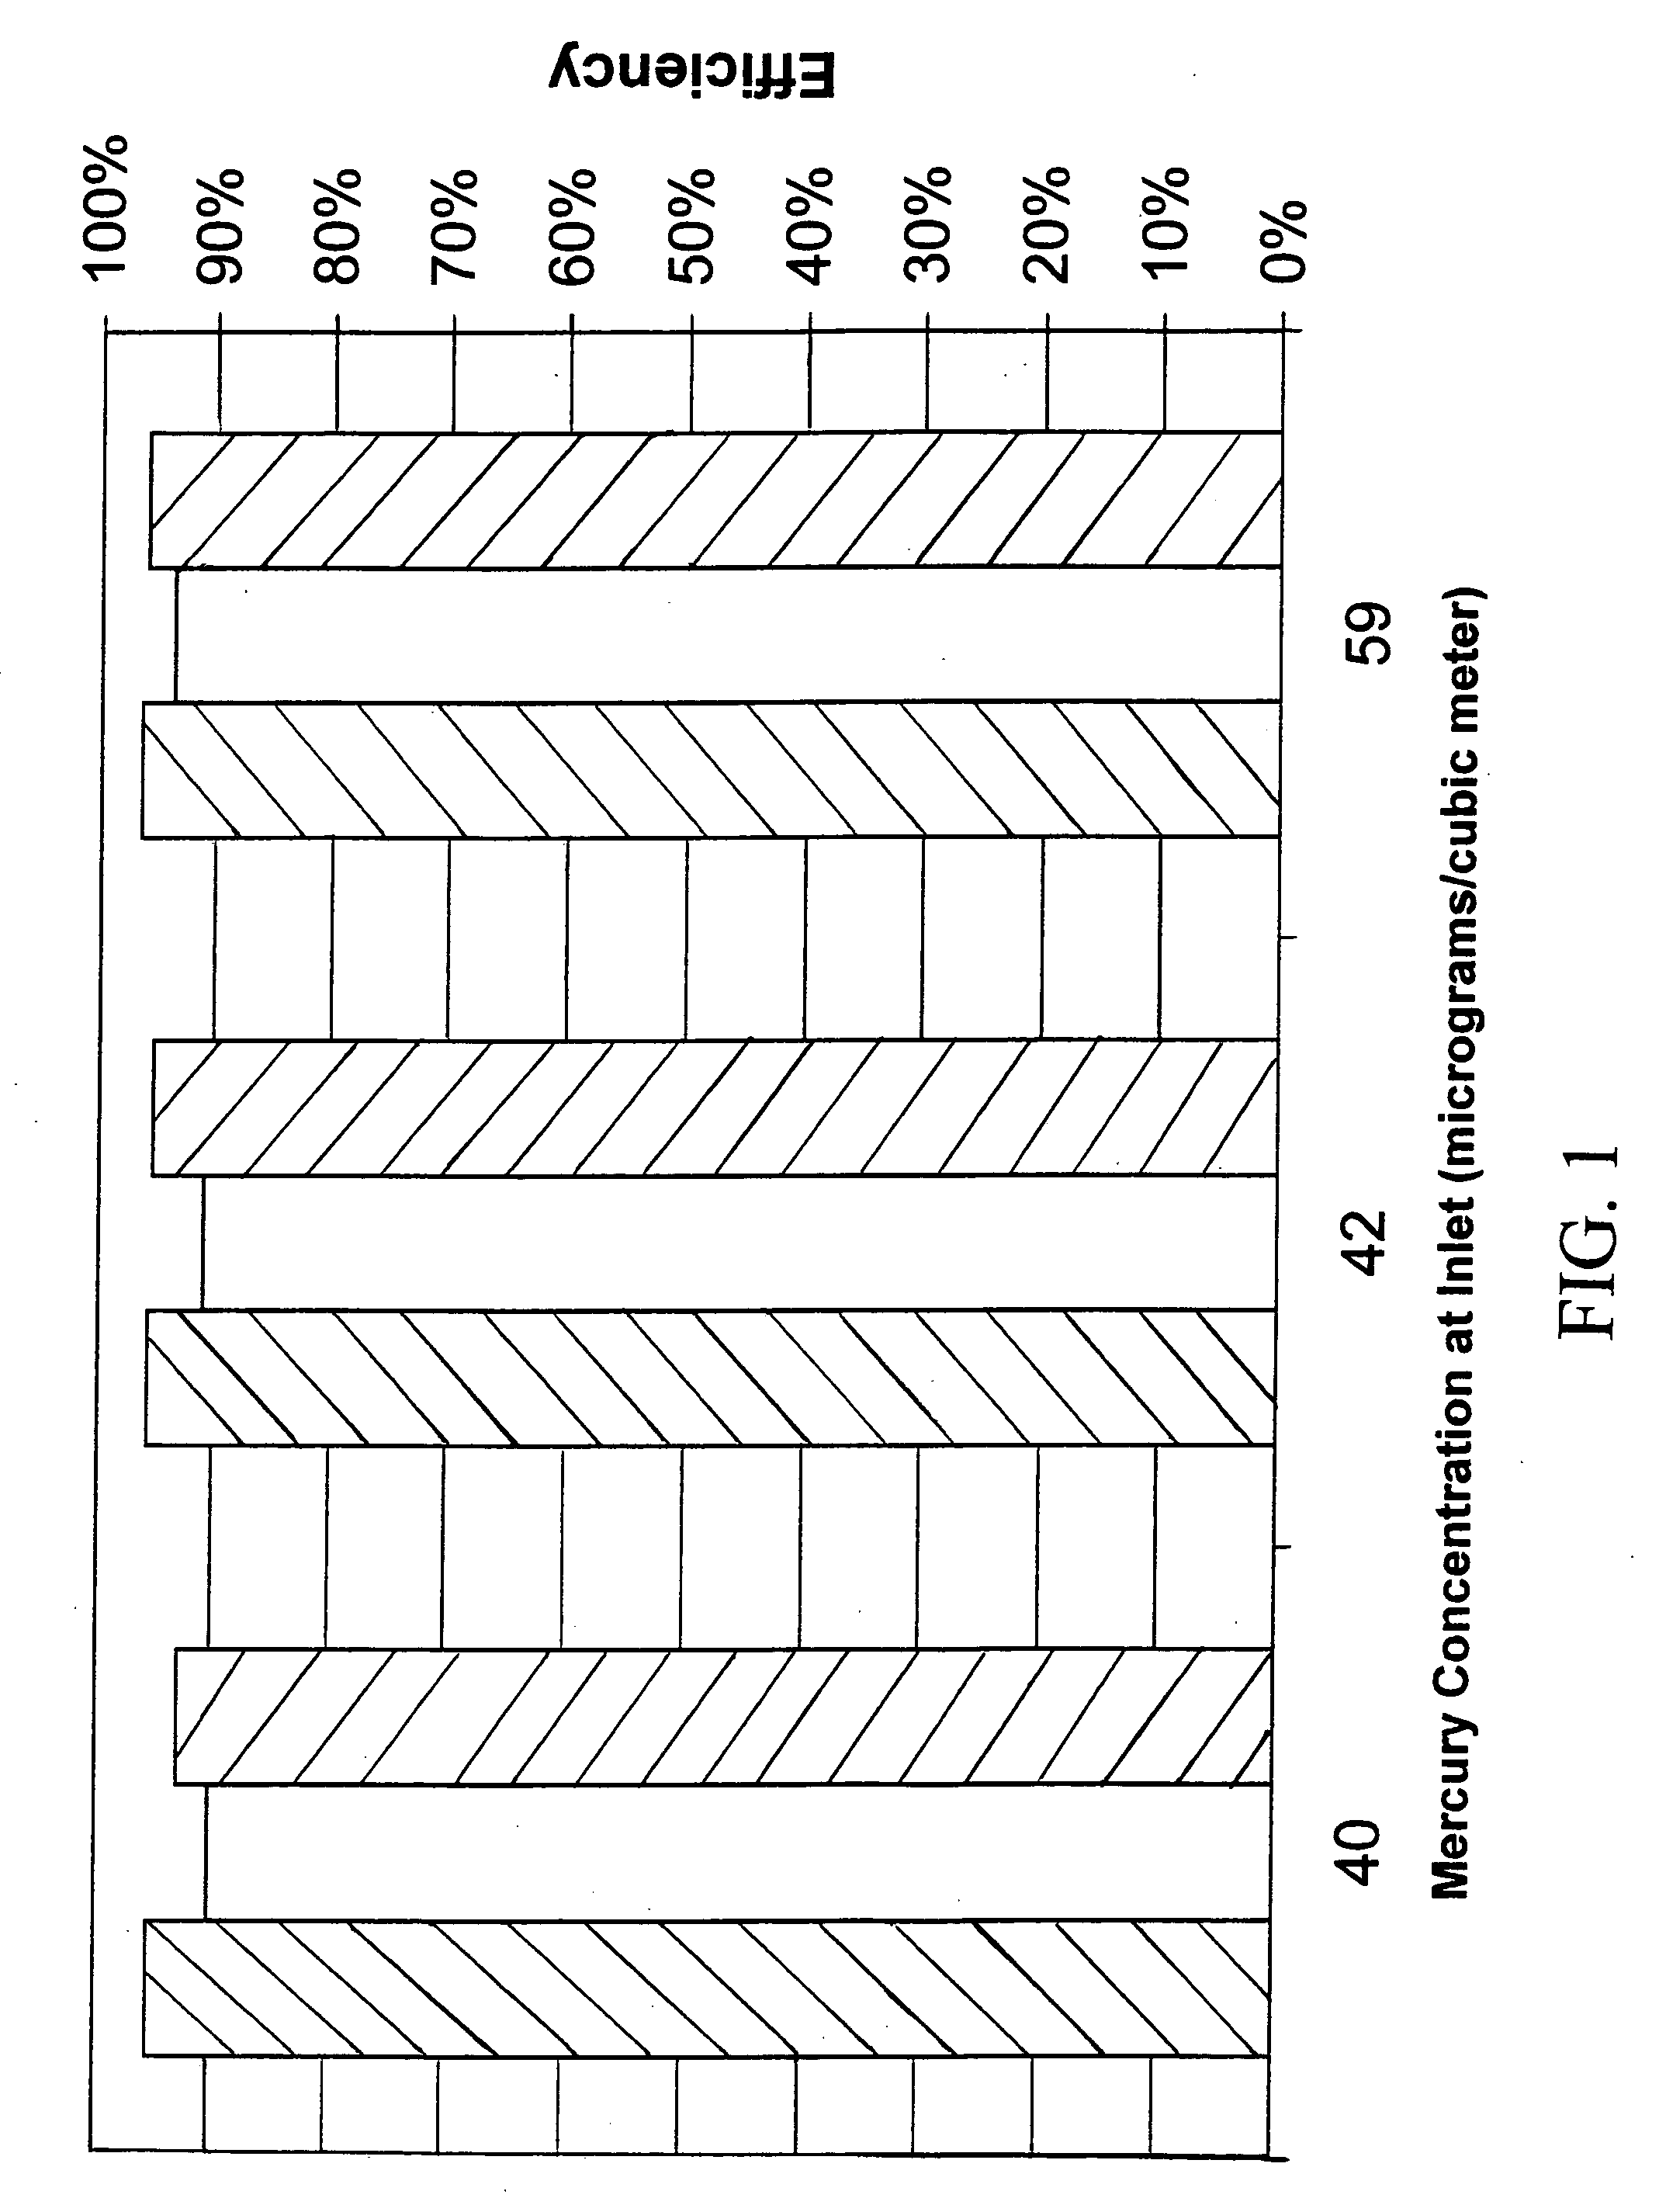 Apparatus and method for removing mercury vapor from a gas stream